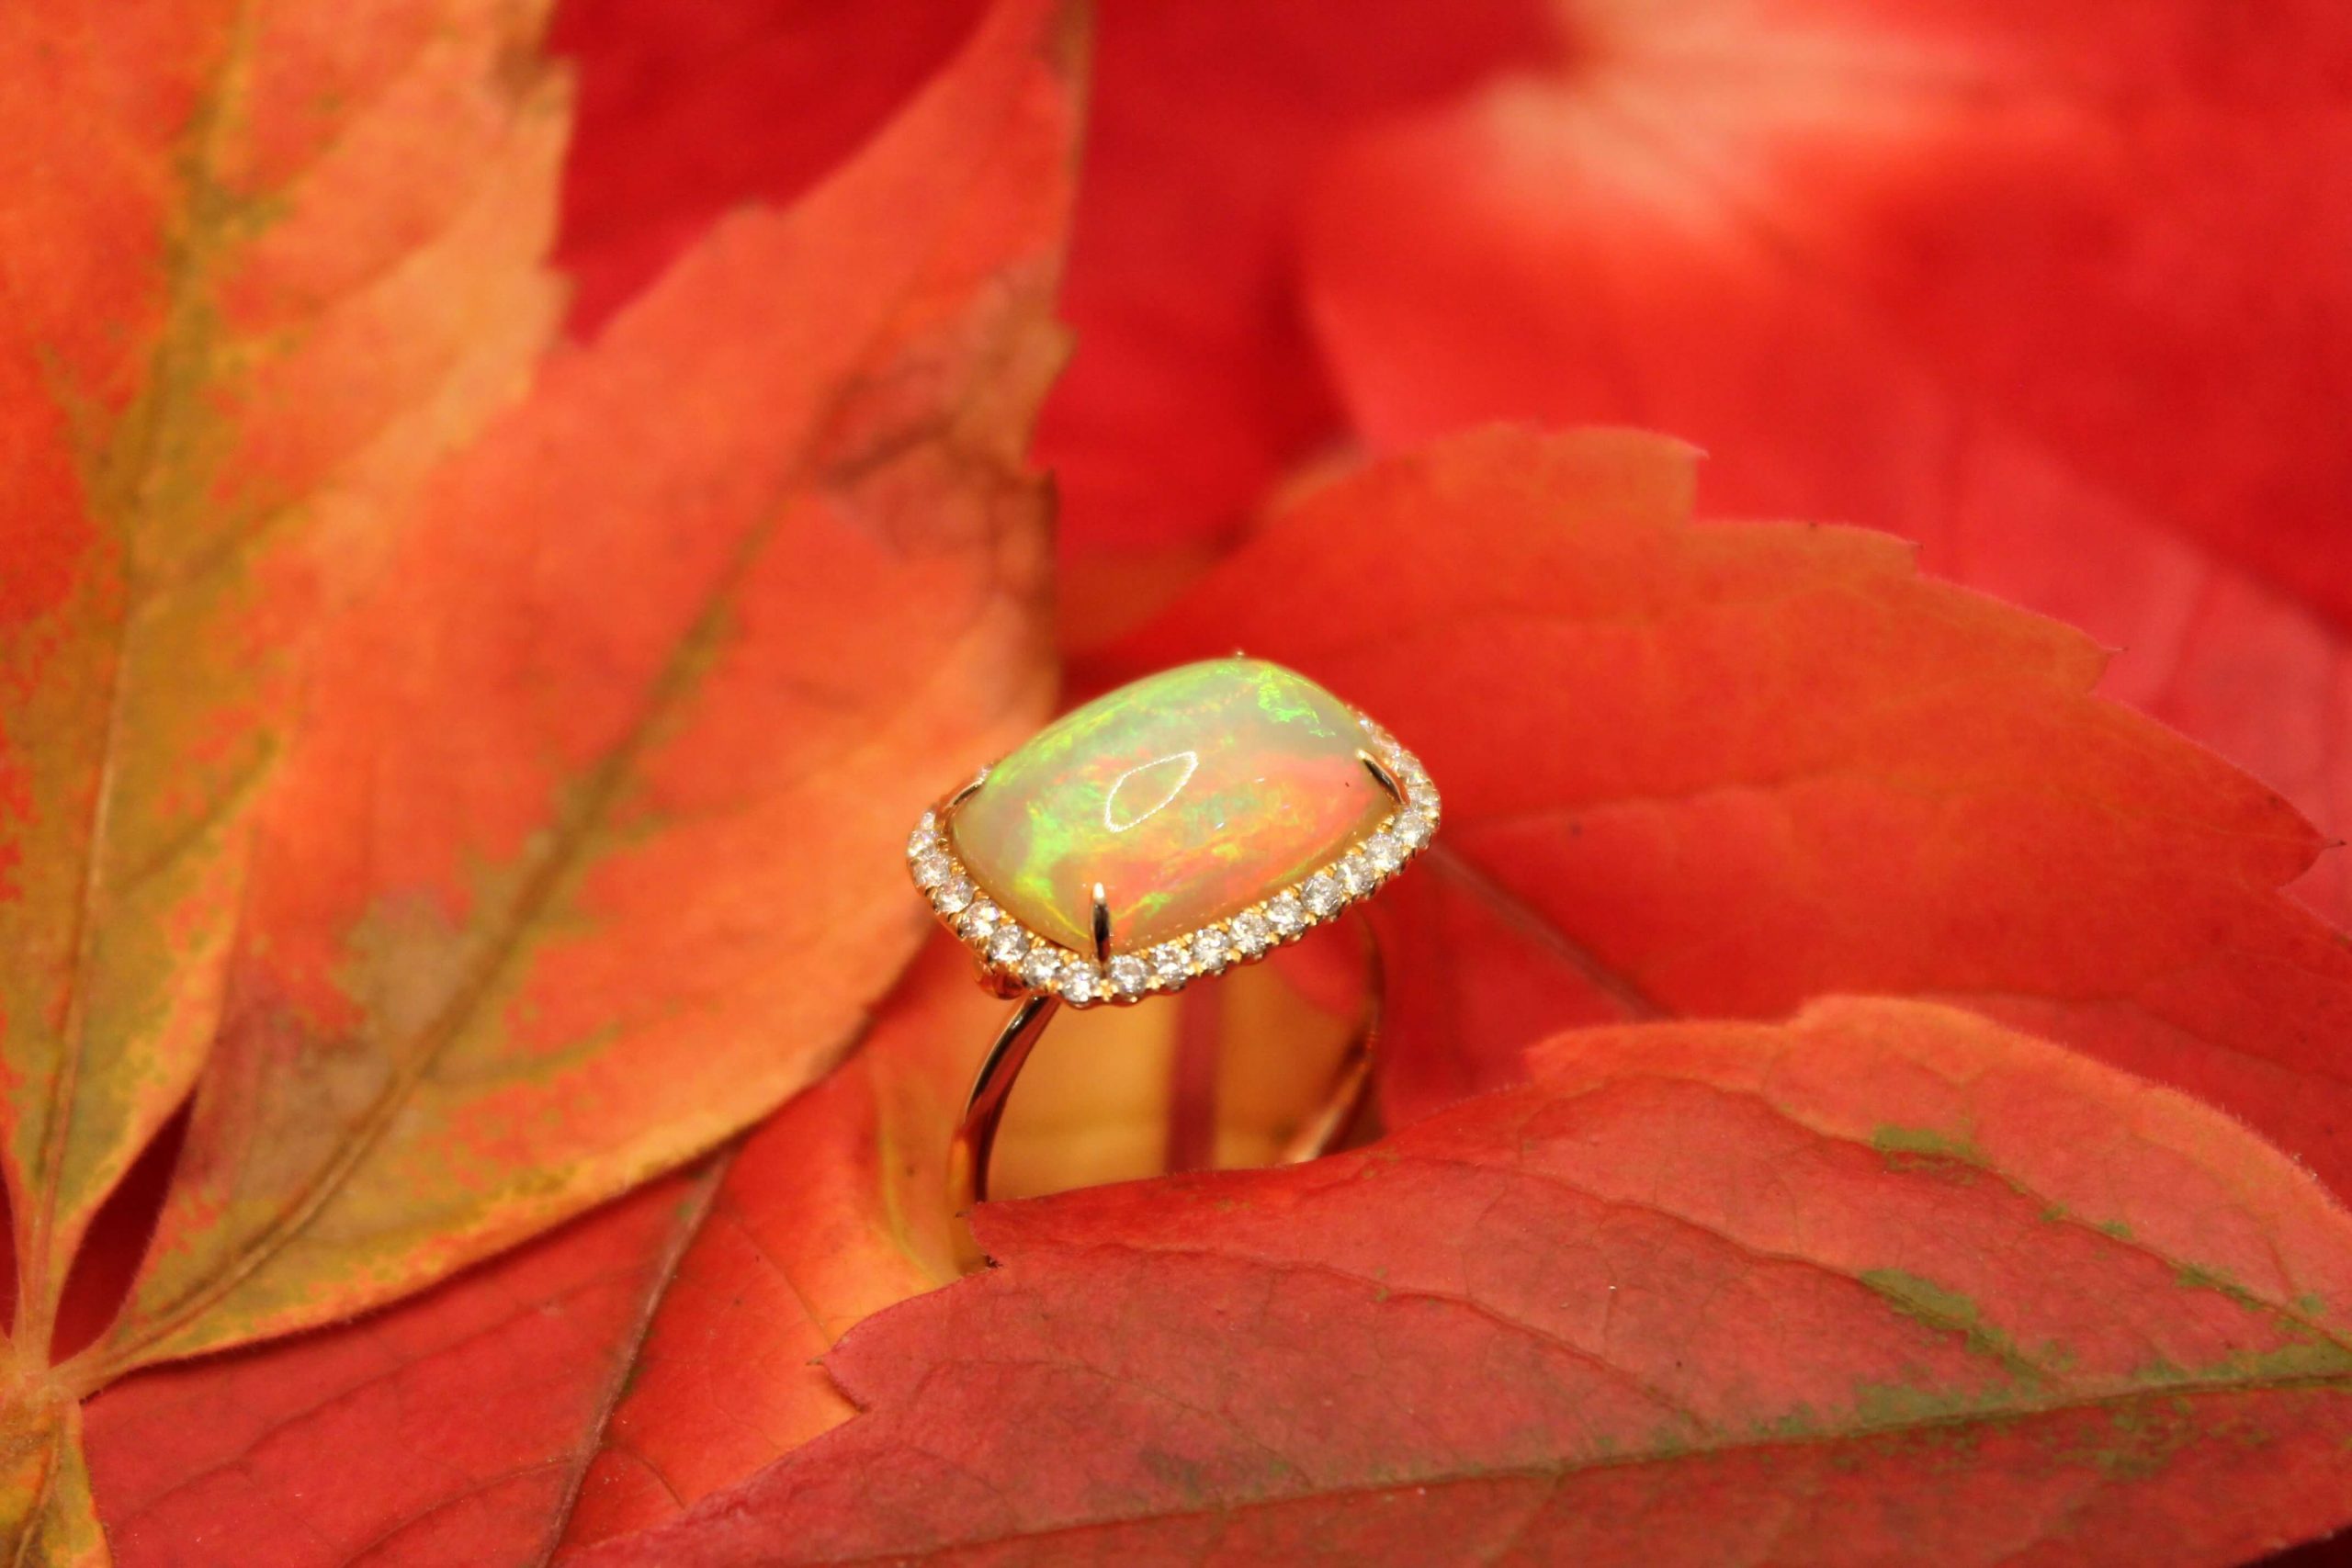 An 18CT ROSE GOLD 4.19CT OPAL AND 0.37CT DIAMOND HALO RING from Robert Gatward Jewellers